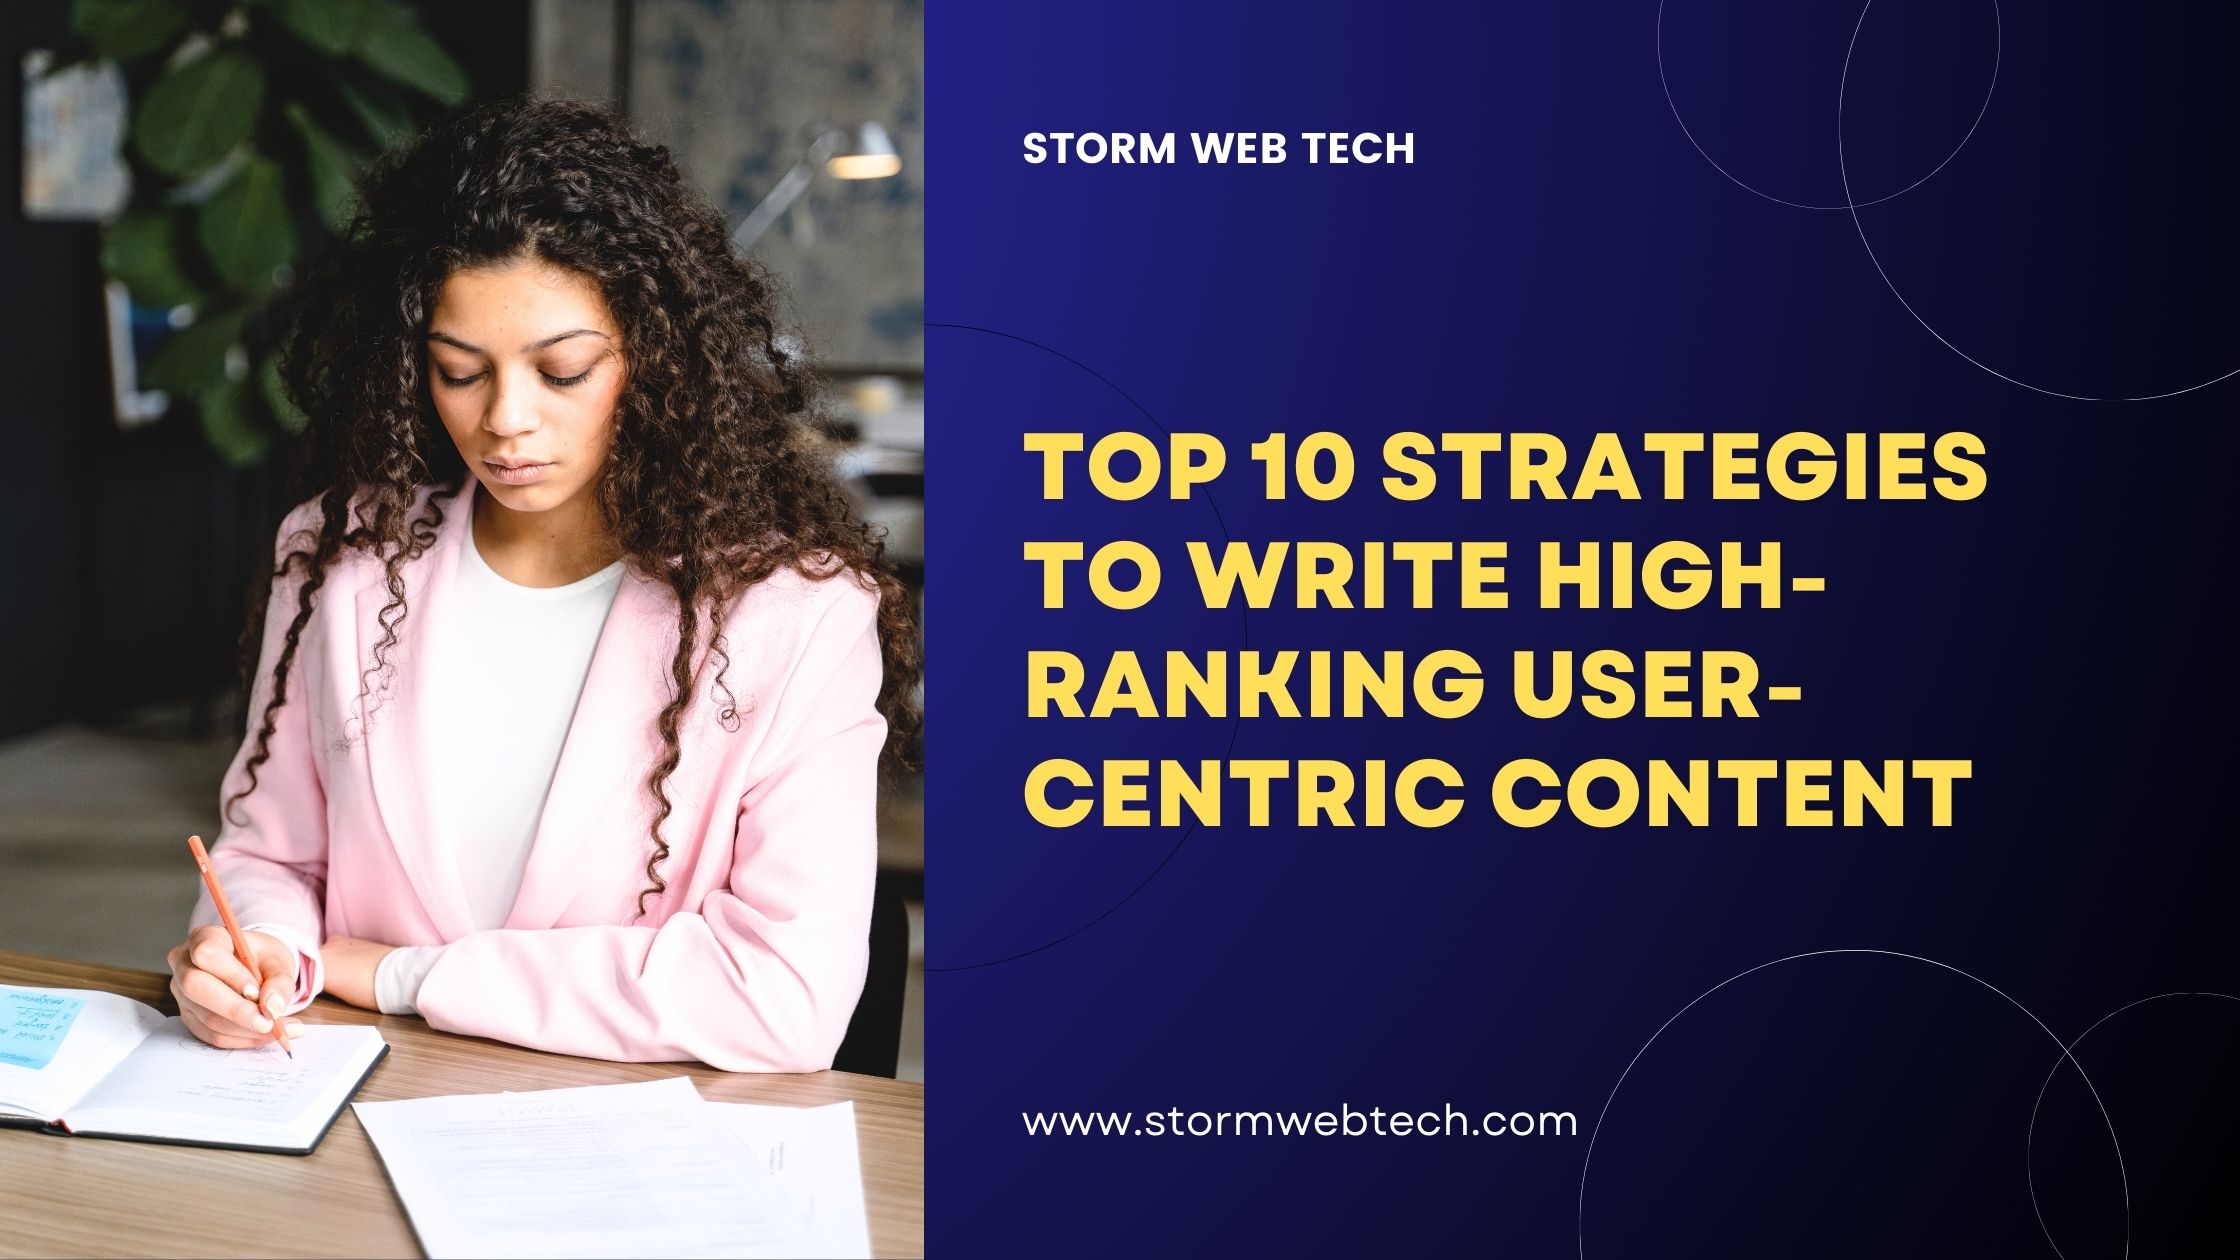 the top 10 strategies to write high-ranking user-centric content that not only captivates readers but also ranks well on search engine results pages.